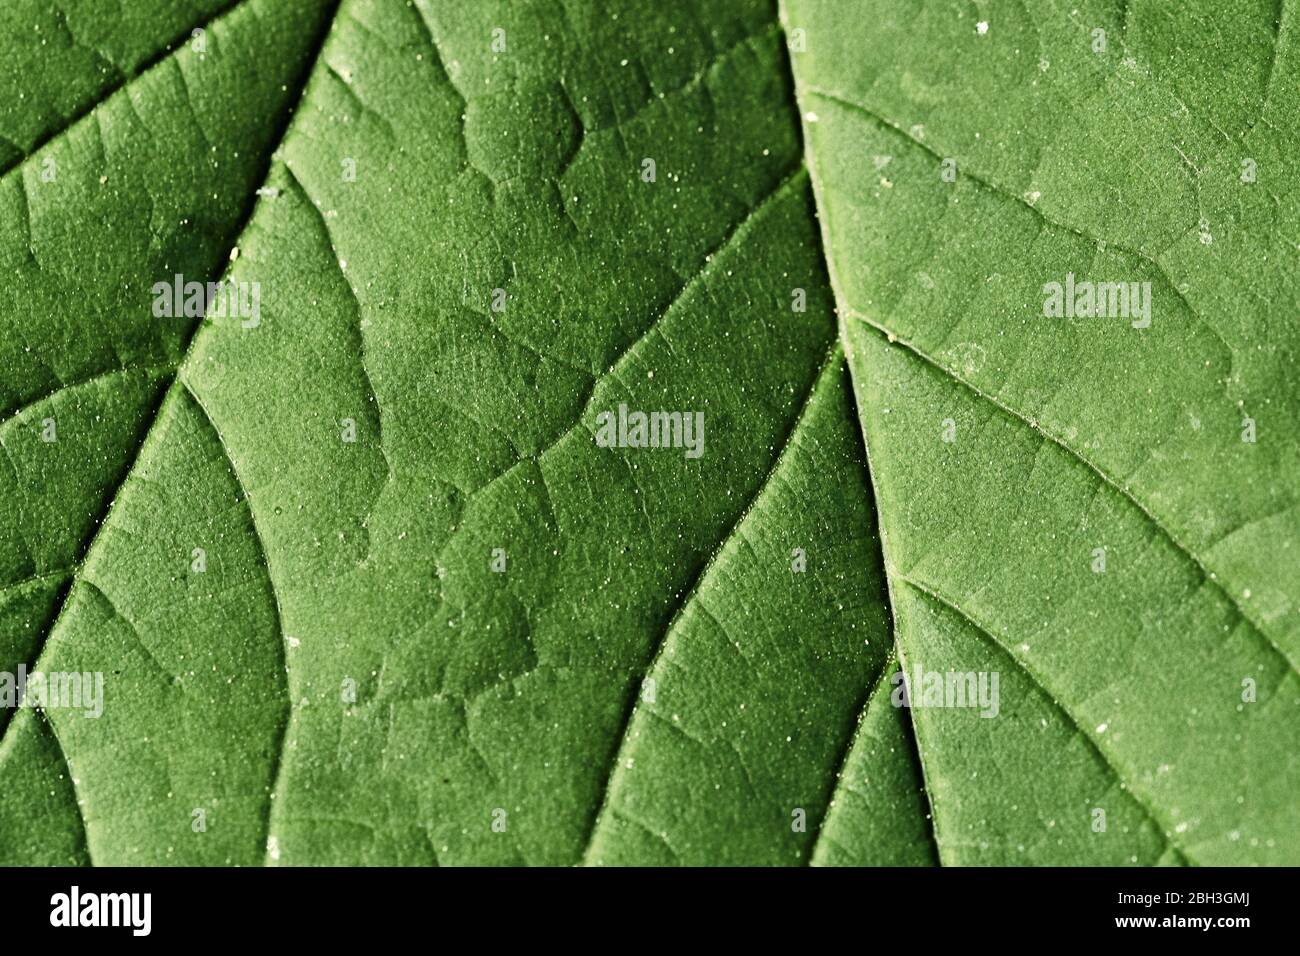 Close-up green leaf texture. Macro nature background Stock Photo